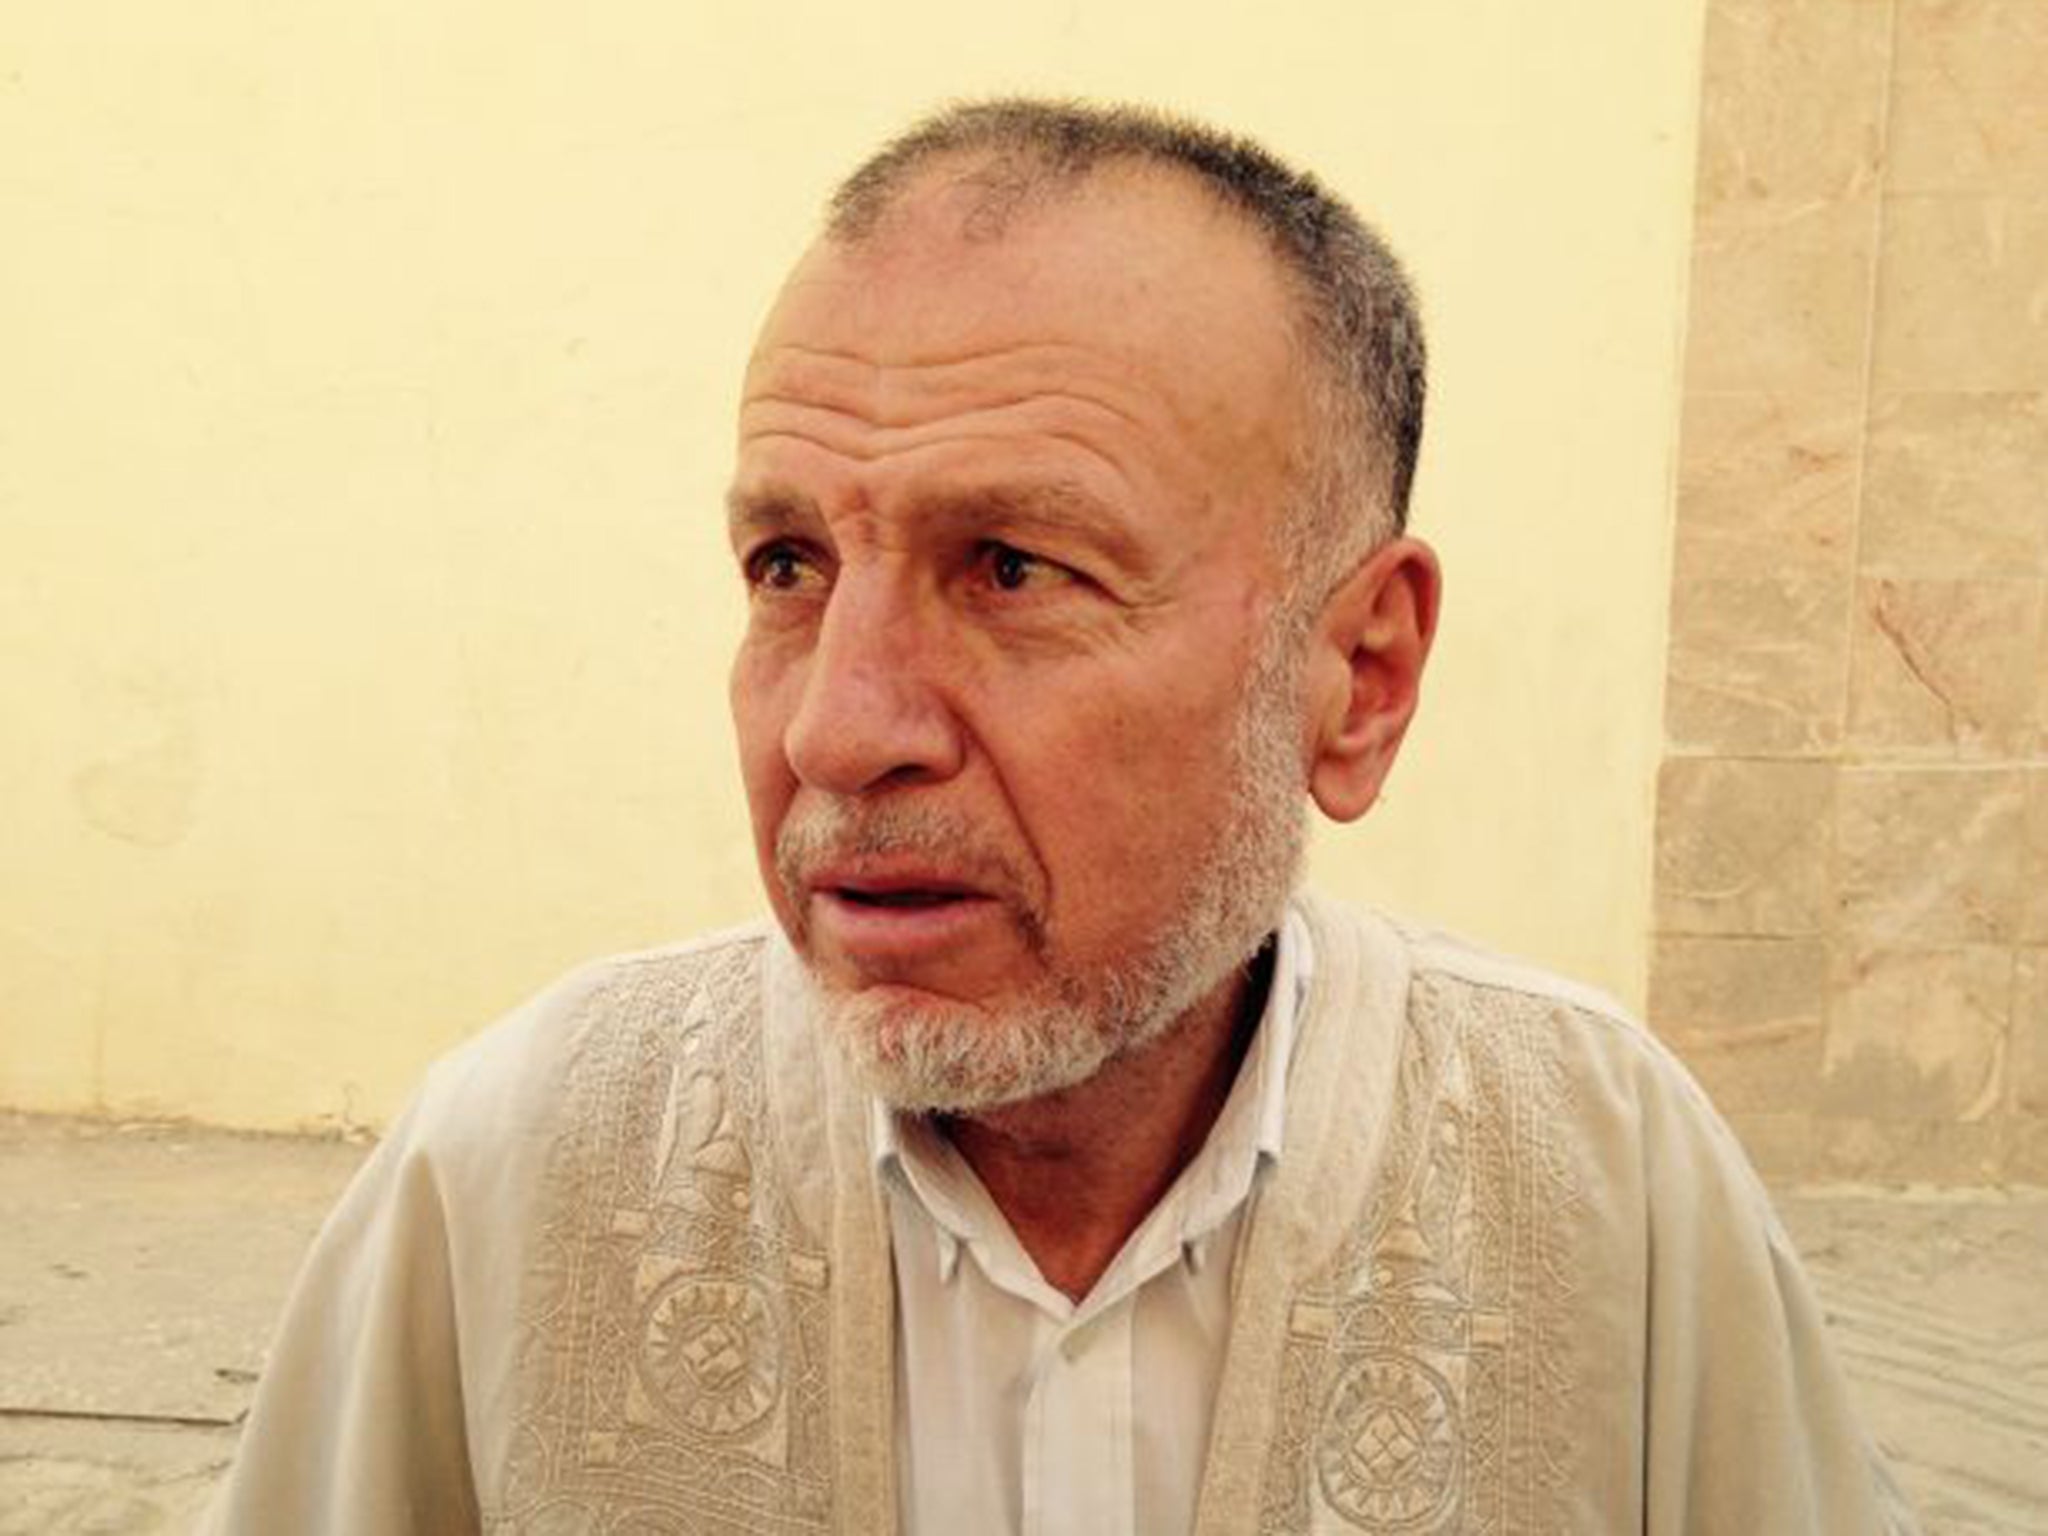 Imam Taib al-Gazi said foreign imams had been coming to Tunisia and preaching extremism